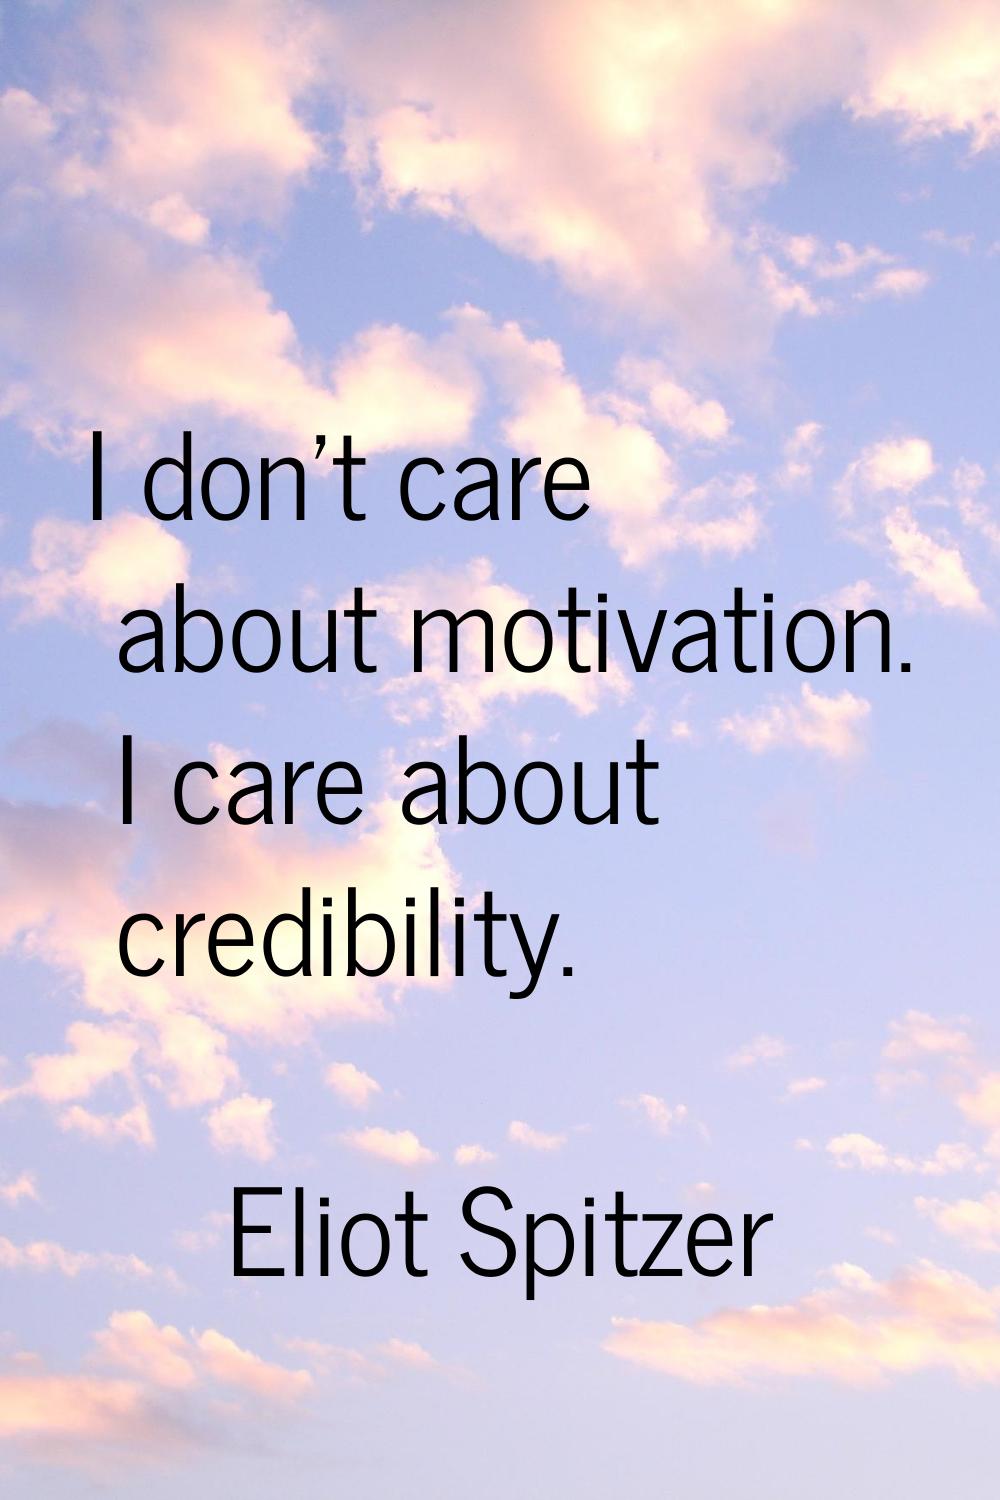 I don't care about motivation. I care about credibility.